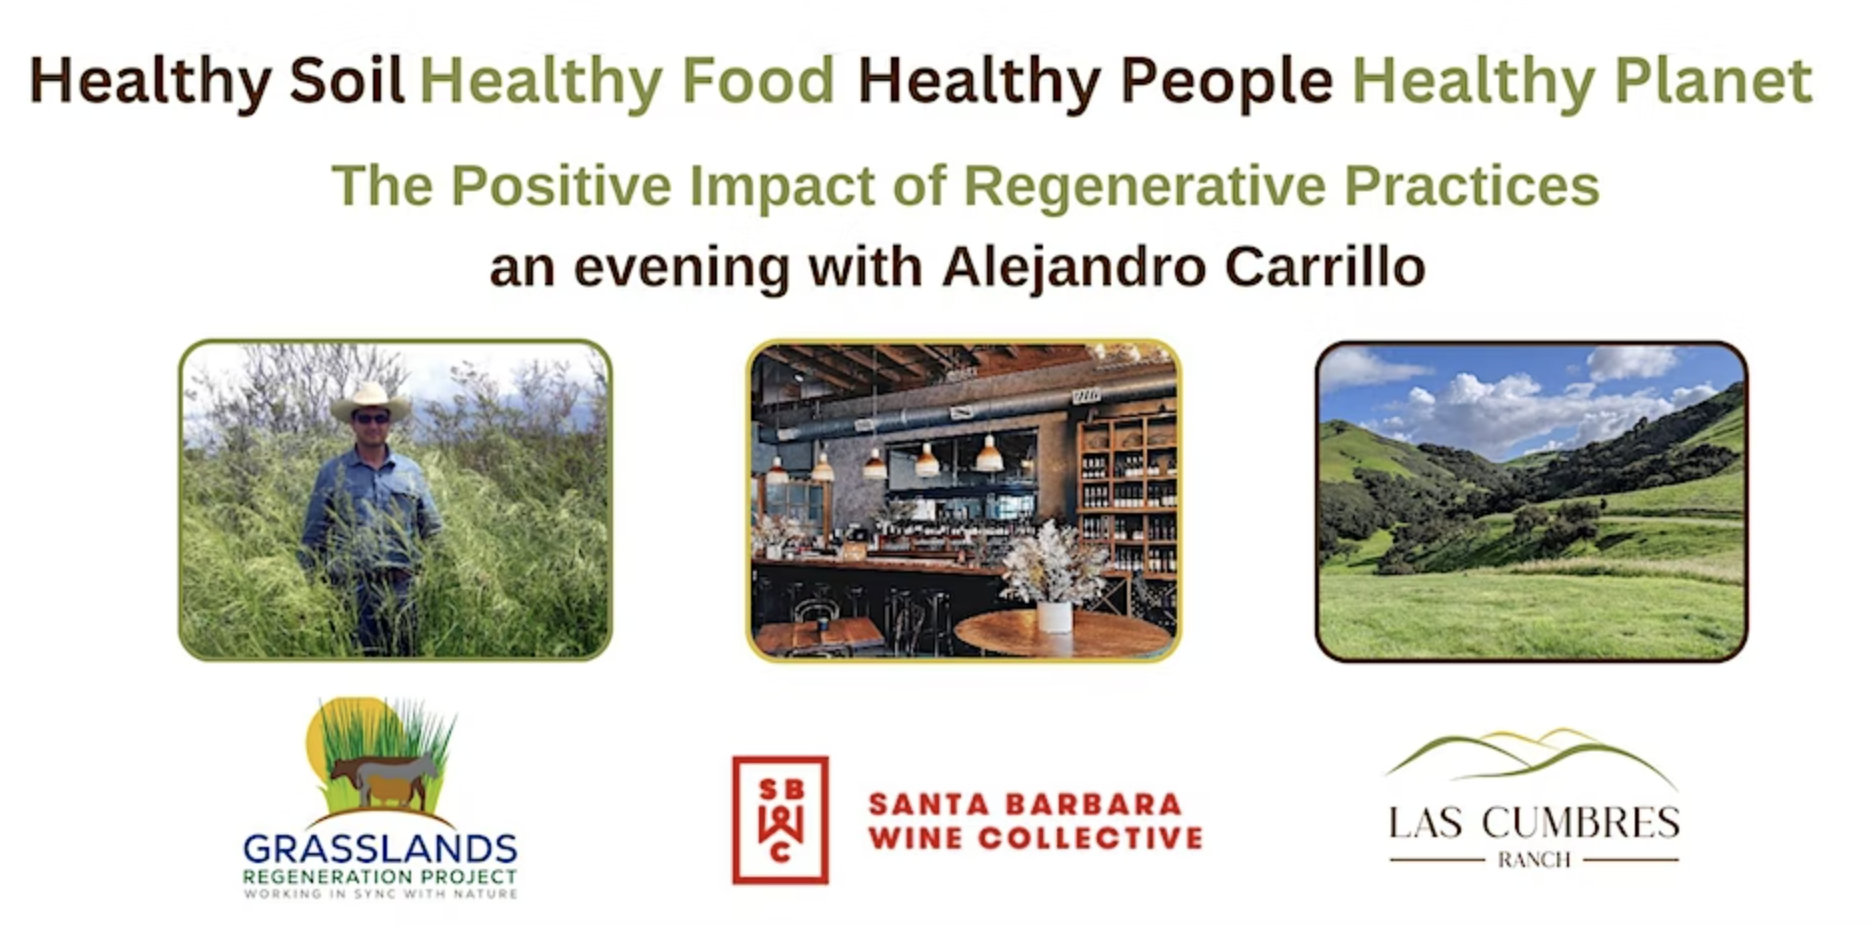 The Positive Impact of Regenerative Practices with Alejandro Carillo